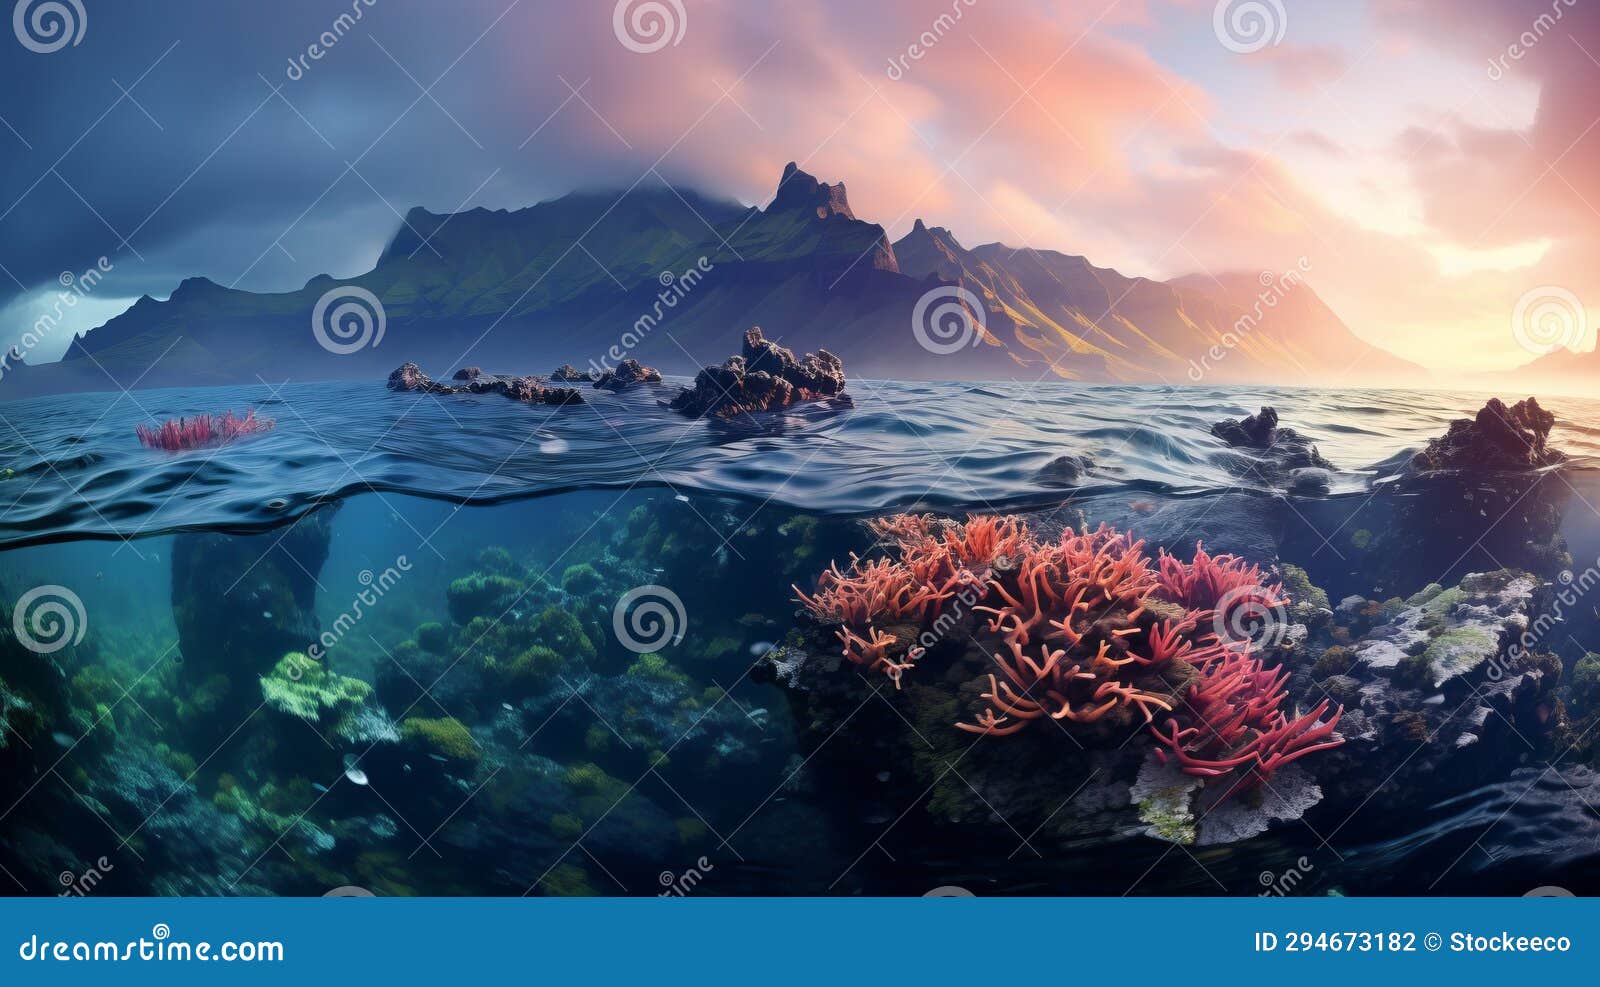 norwegian nature: seashorescape with colorful coral reefs and mountains